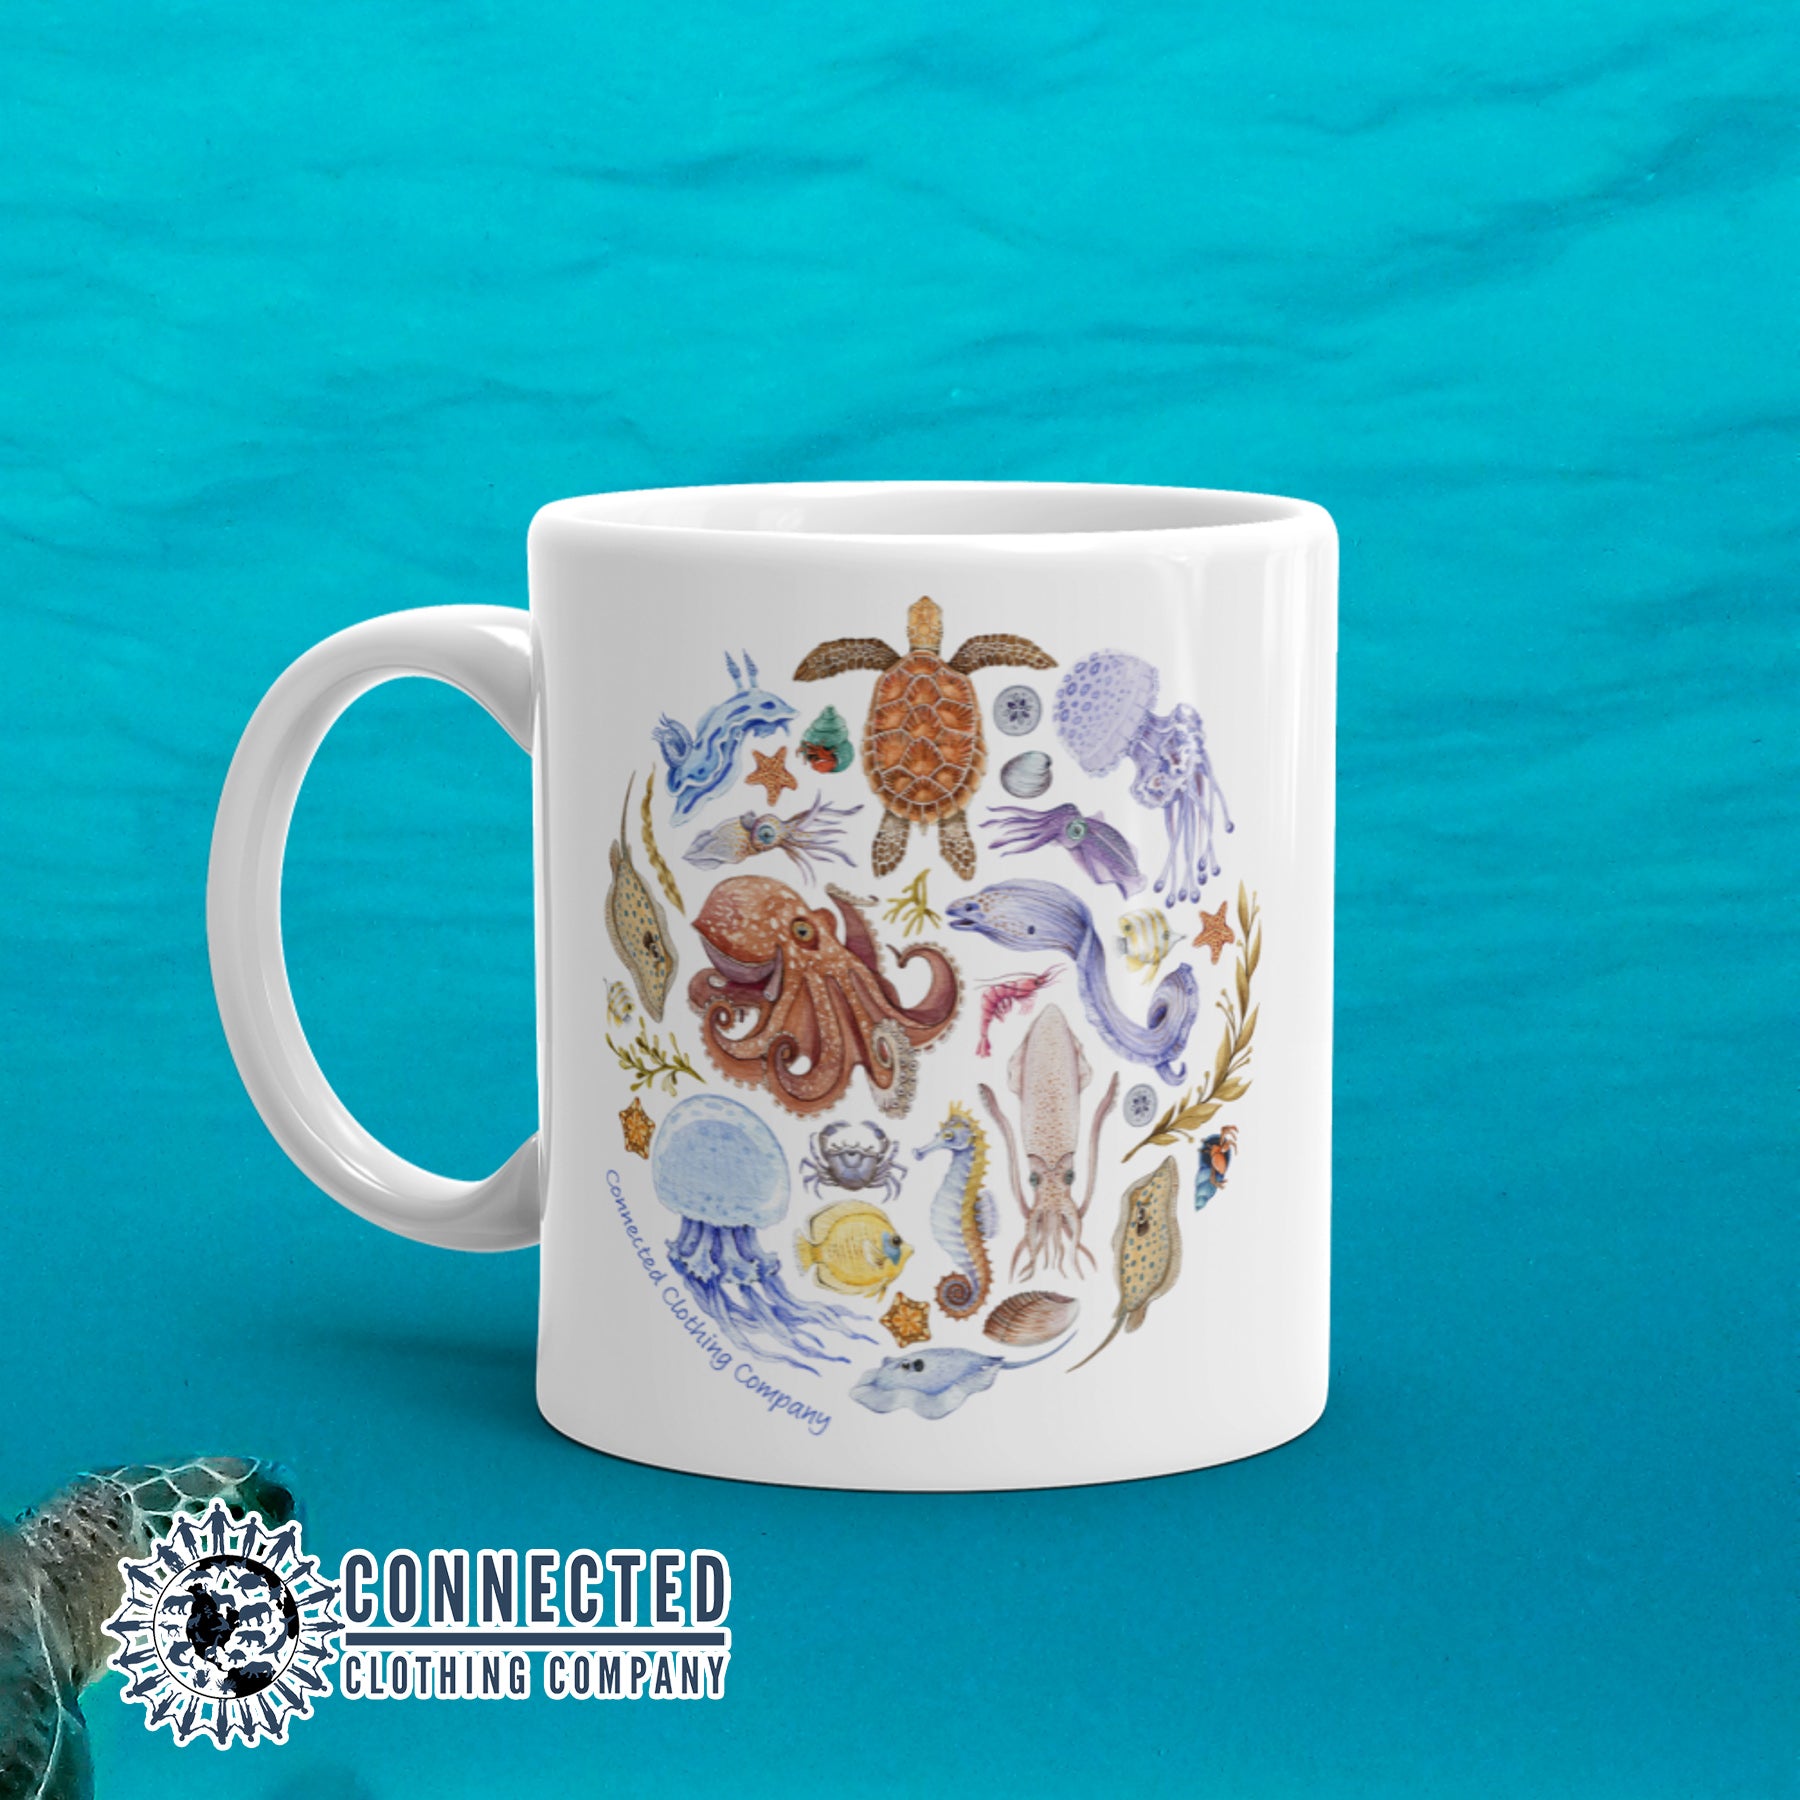 Ocean Sea Creature Classic Mug - Connected Clothing Company - Ethical and Sustainable Clothing That Gives Back - 10% donated to Mission Blue ocean conservation